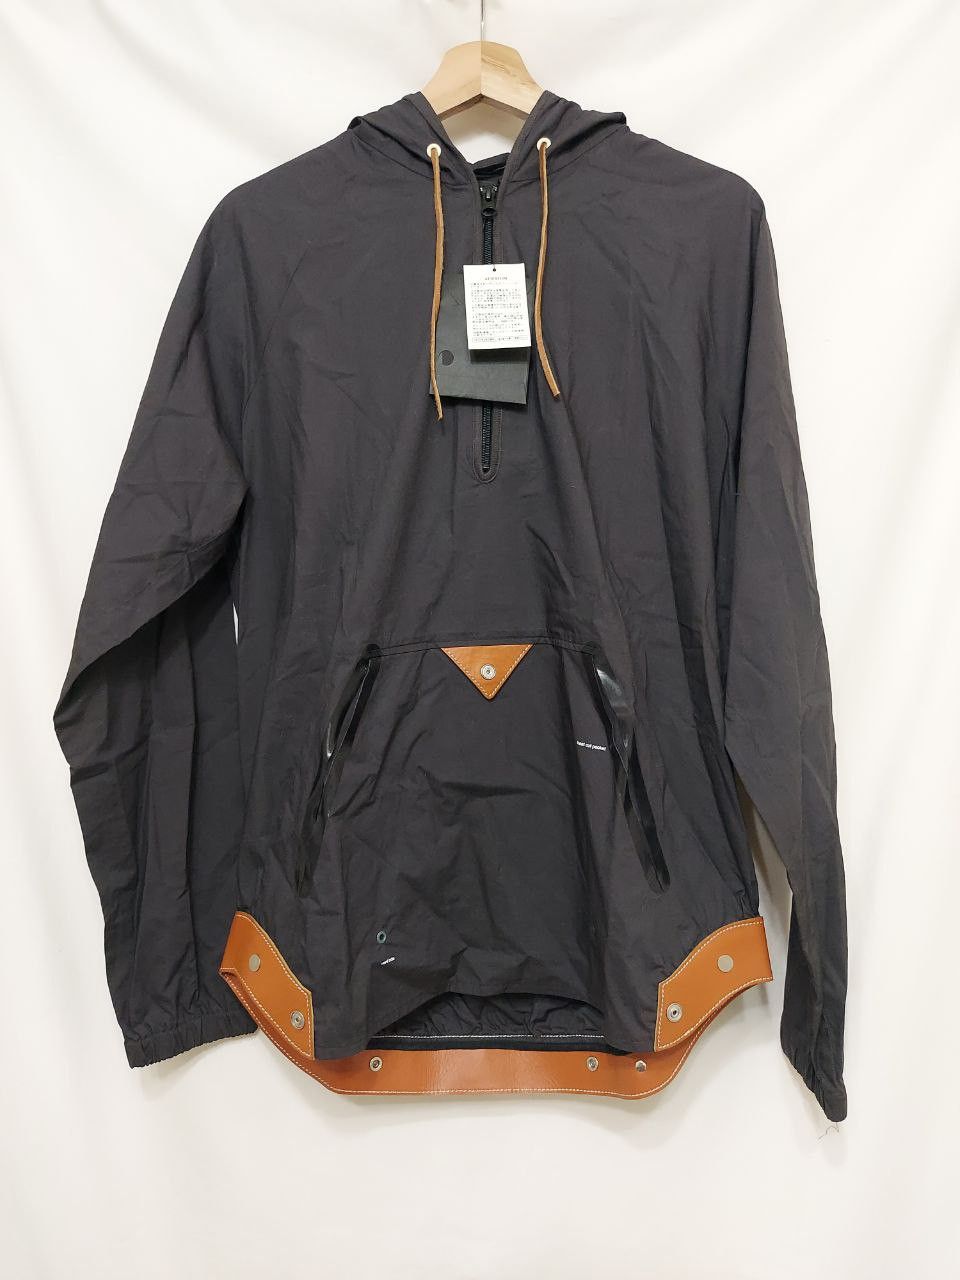 Undercover SS10 Anorak Leather Trim Jacket | Grailed